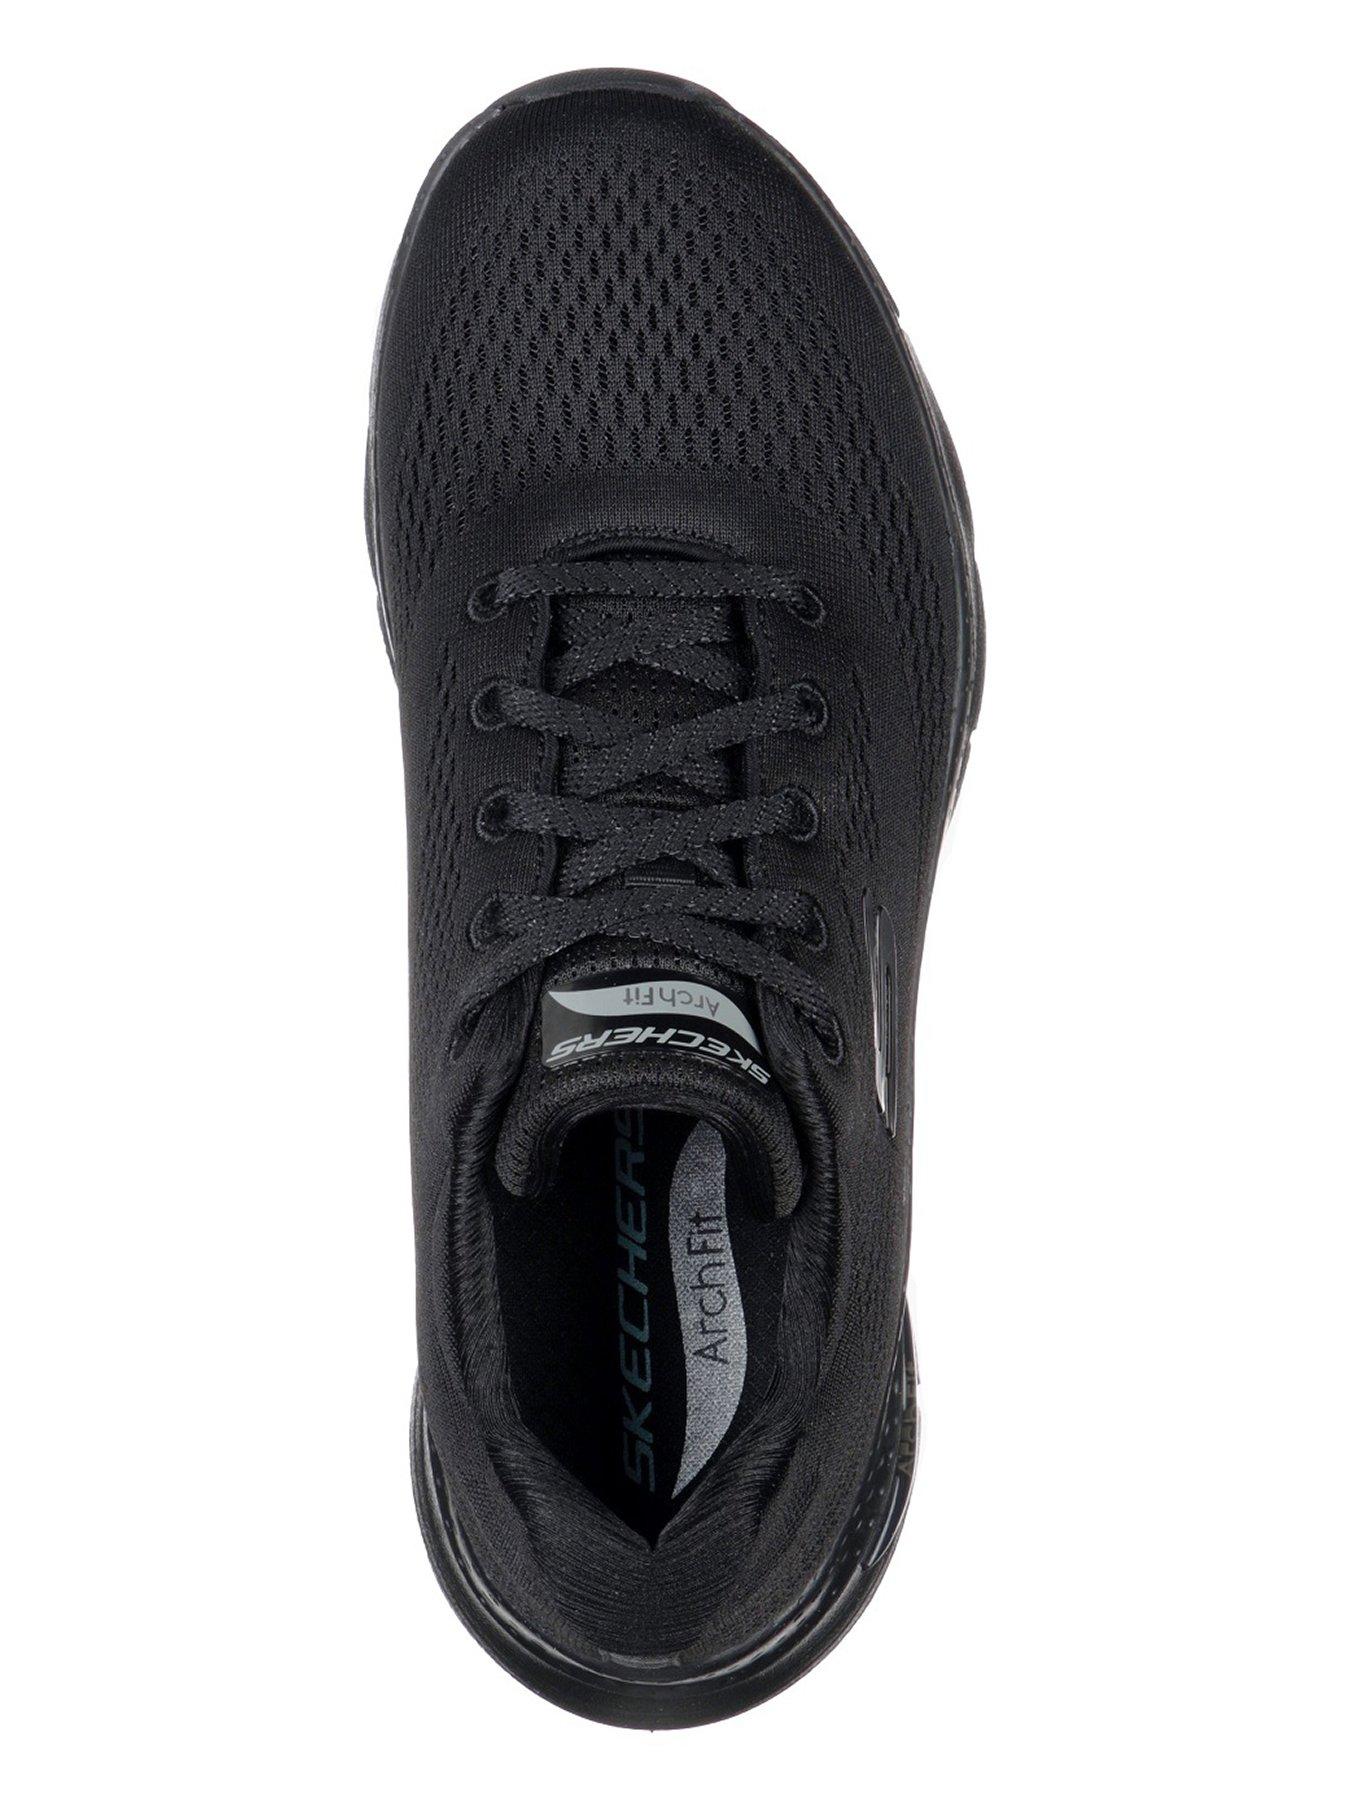  Arch Fit Big Appeal Engineered Mesh Lace-up Trainers